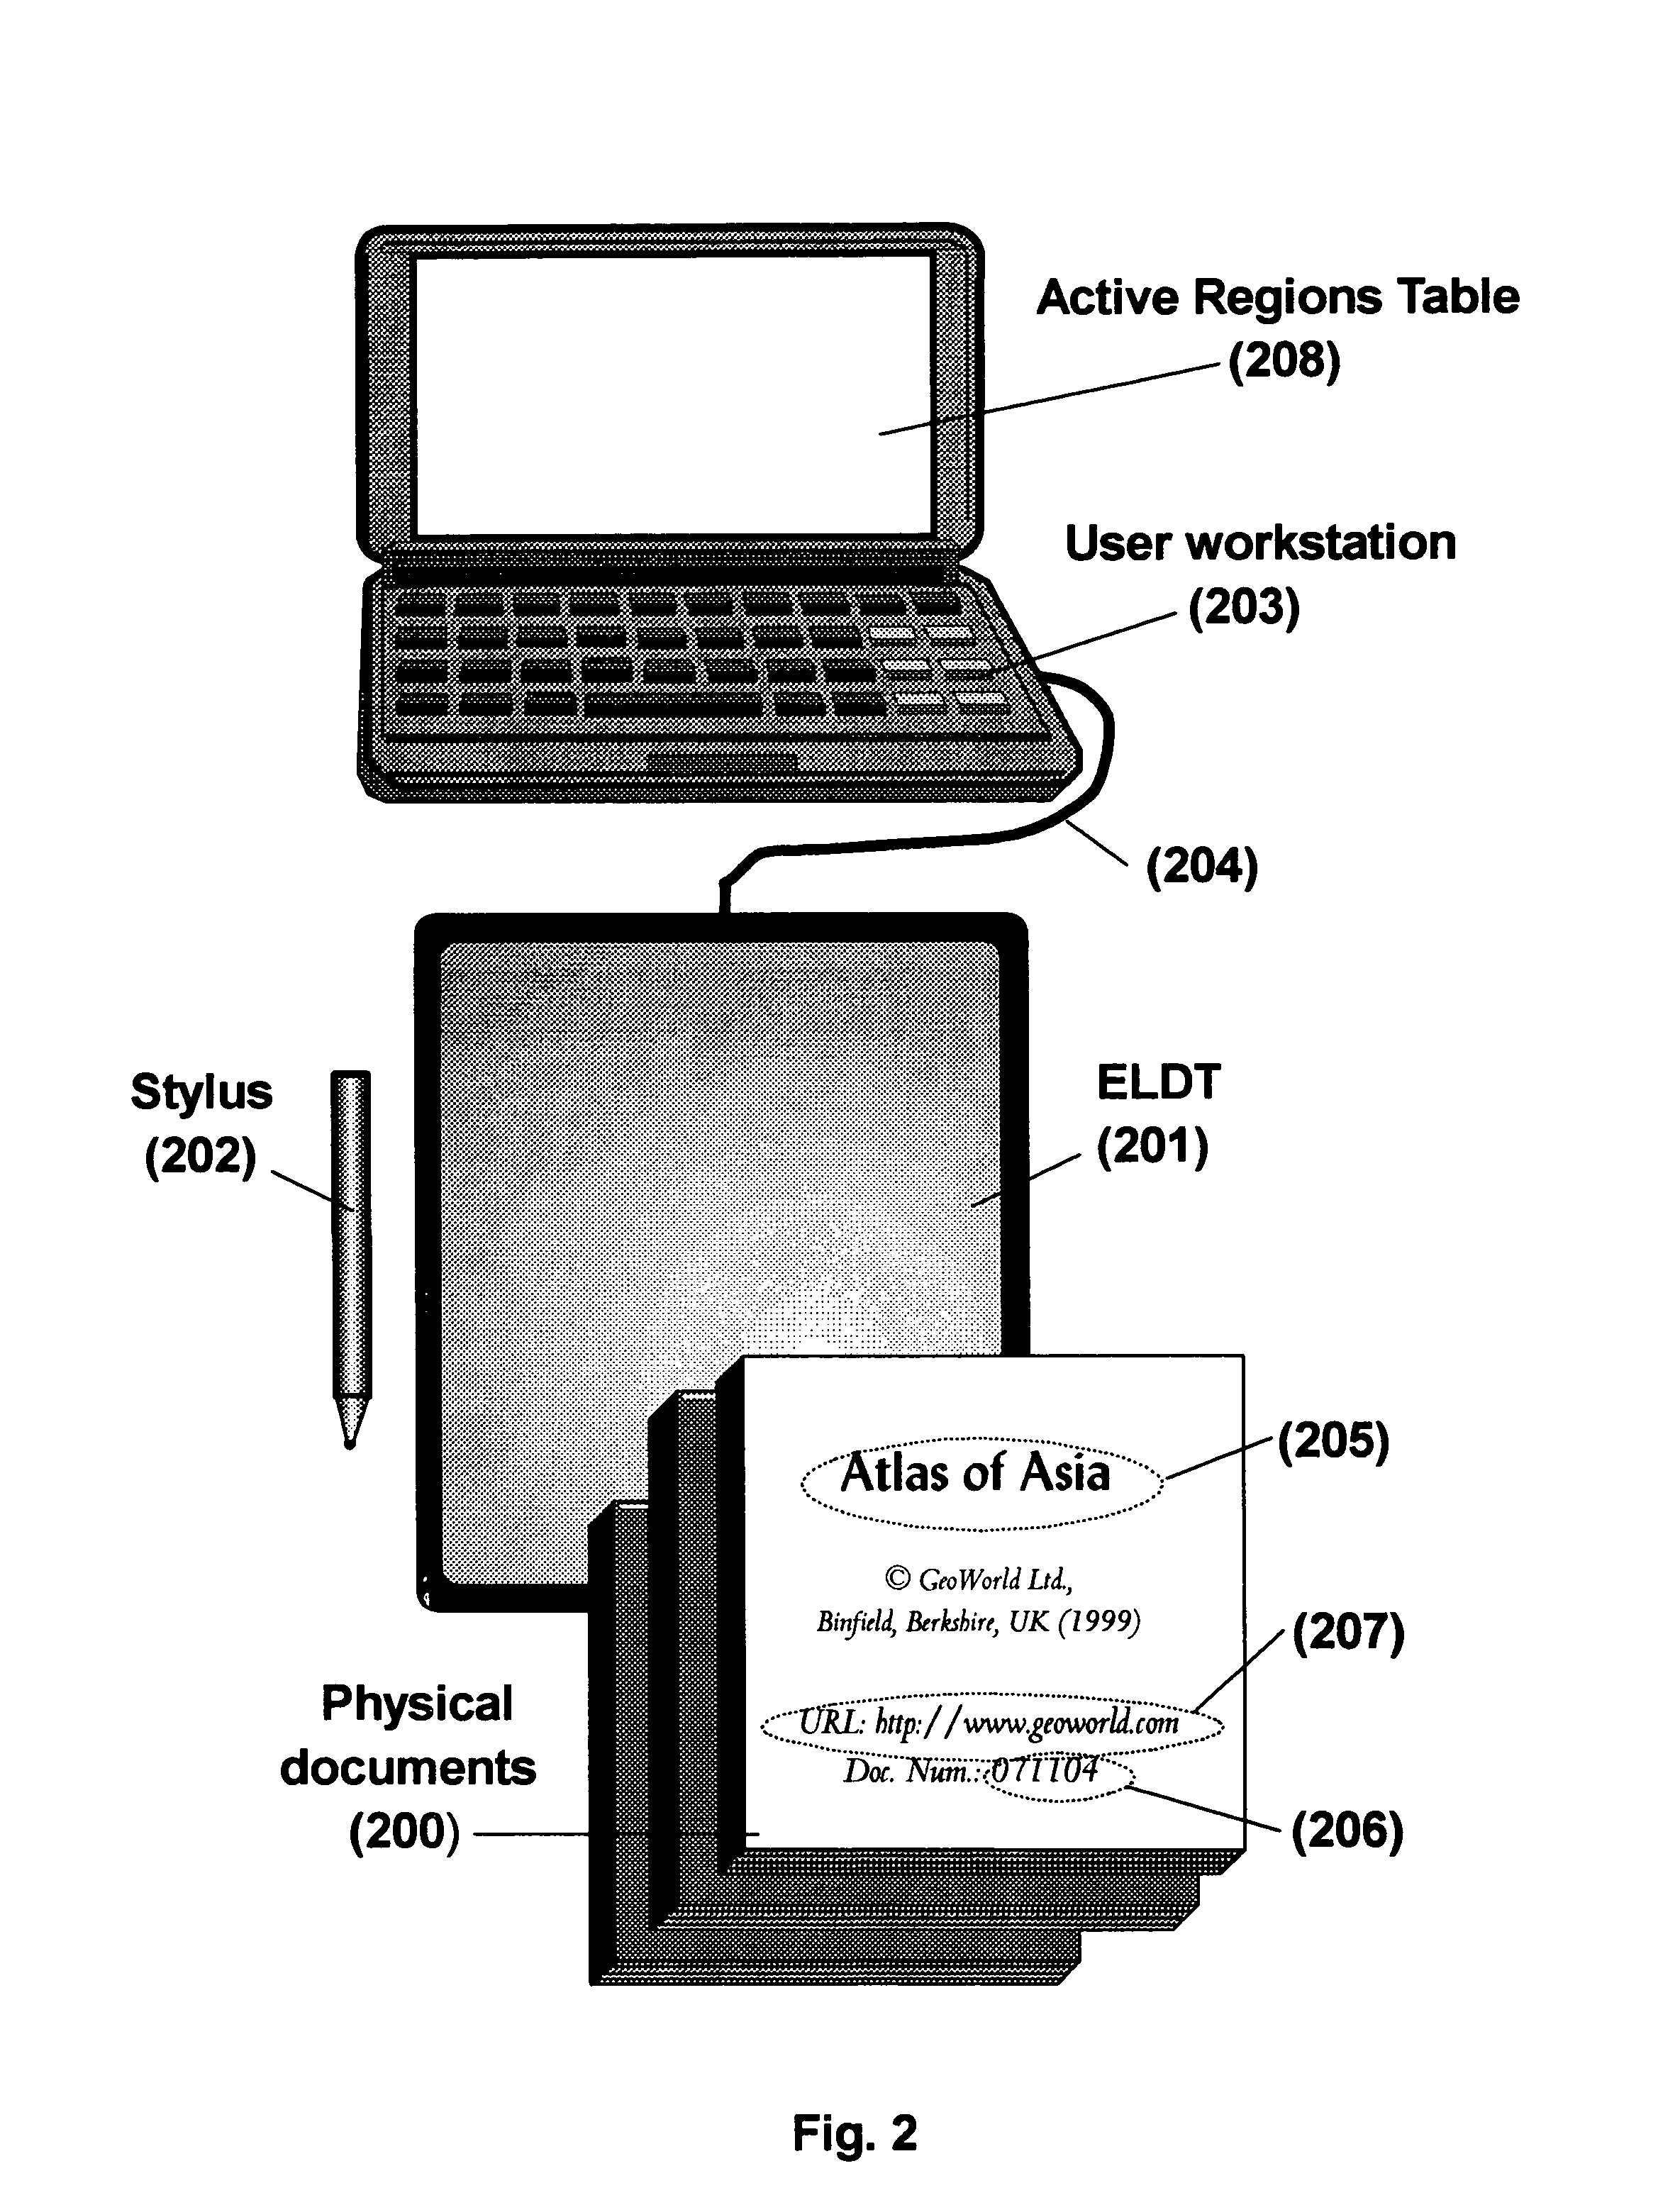 Method for creating and selecting active regions on physical documents